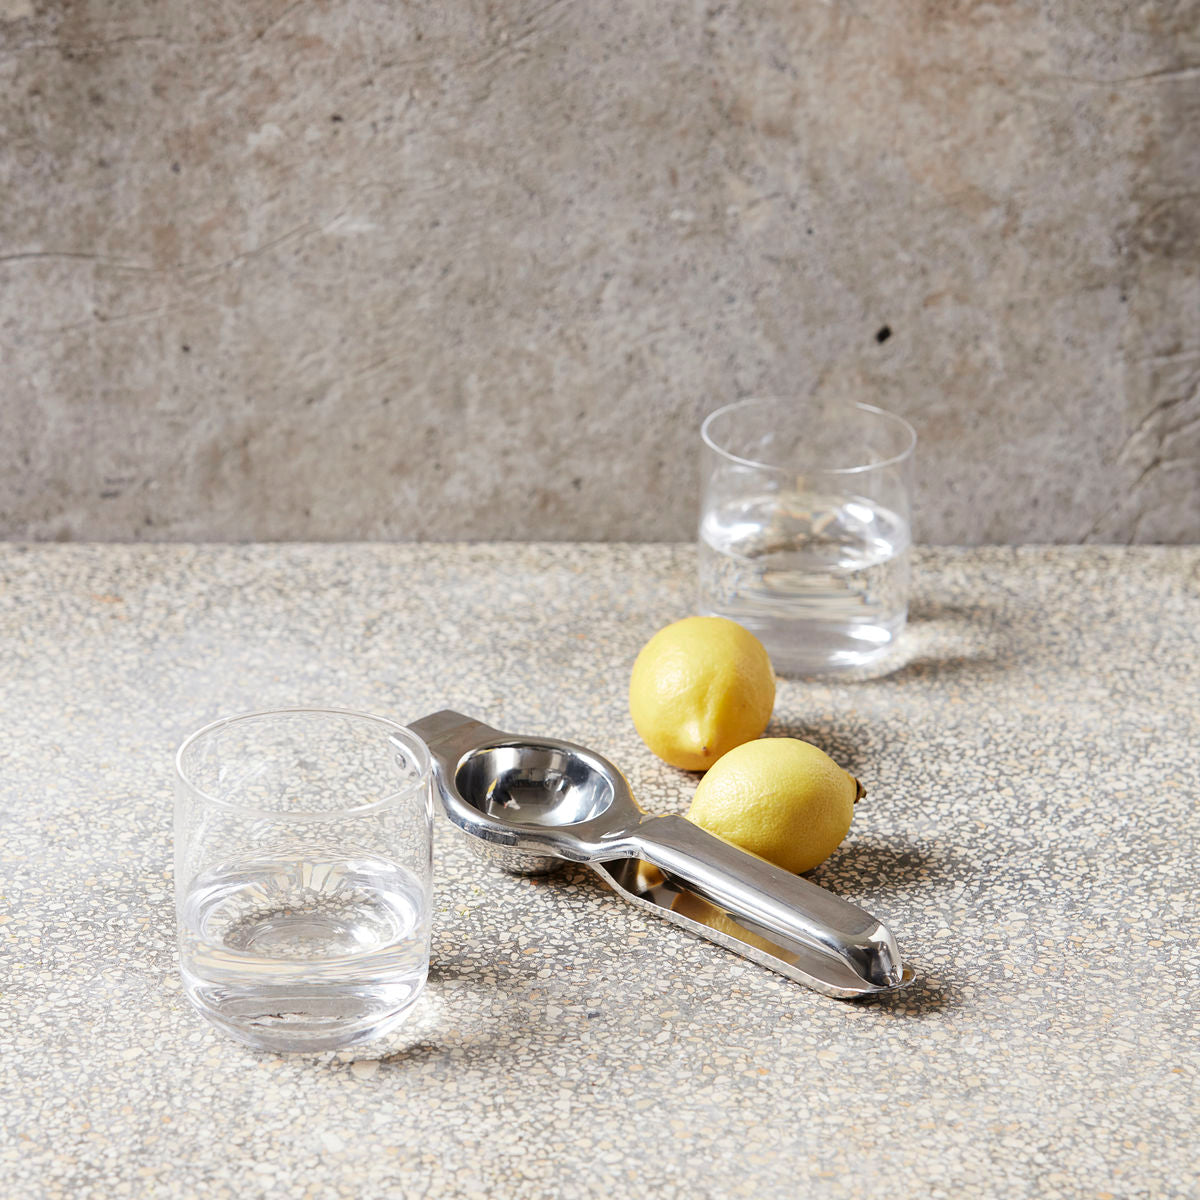 Stainless Steel Lemon Squeezer with lemons